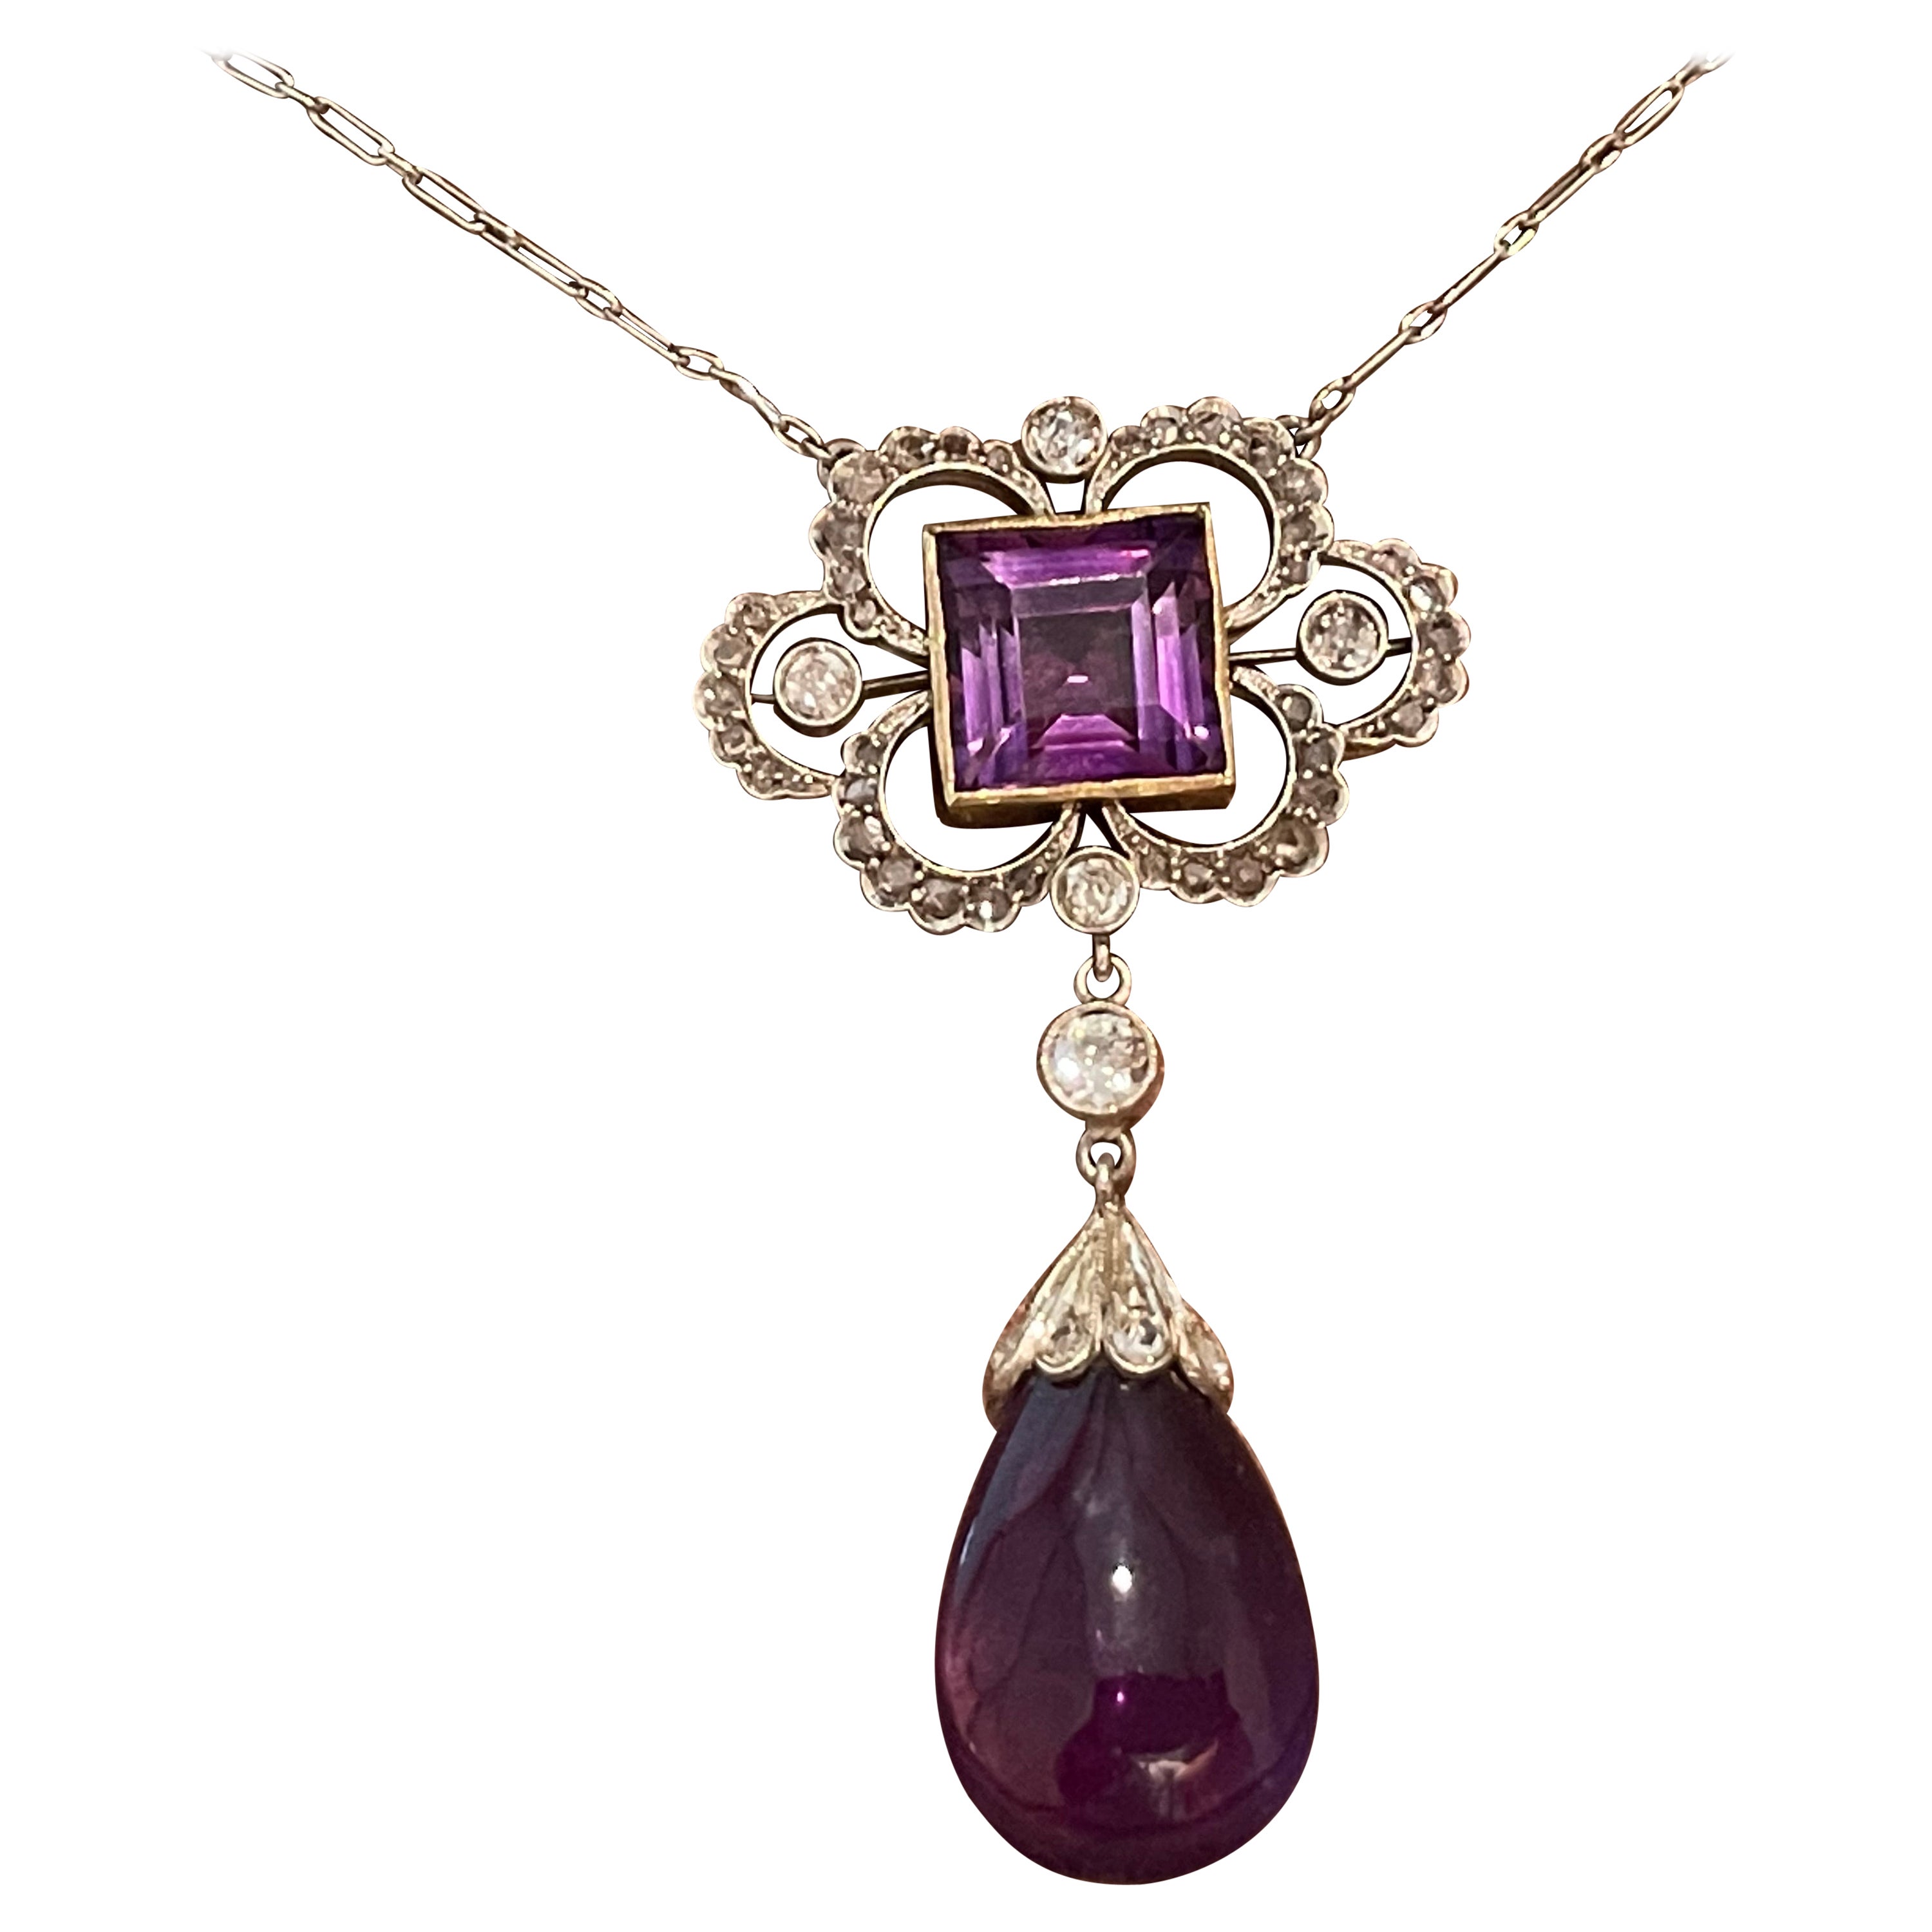 Platinum and Gold Edwardian Amethyst Briolette and Diamond Necklace circa 1910